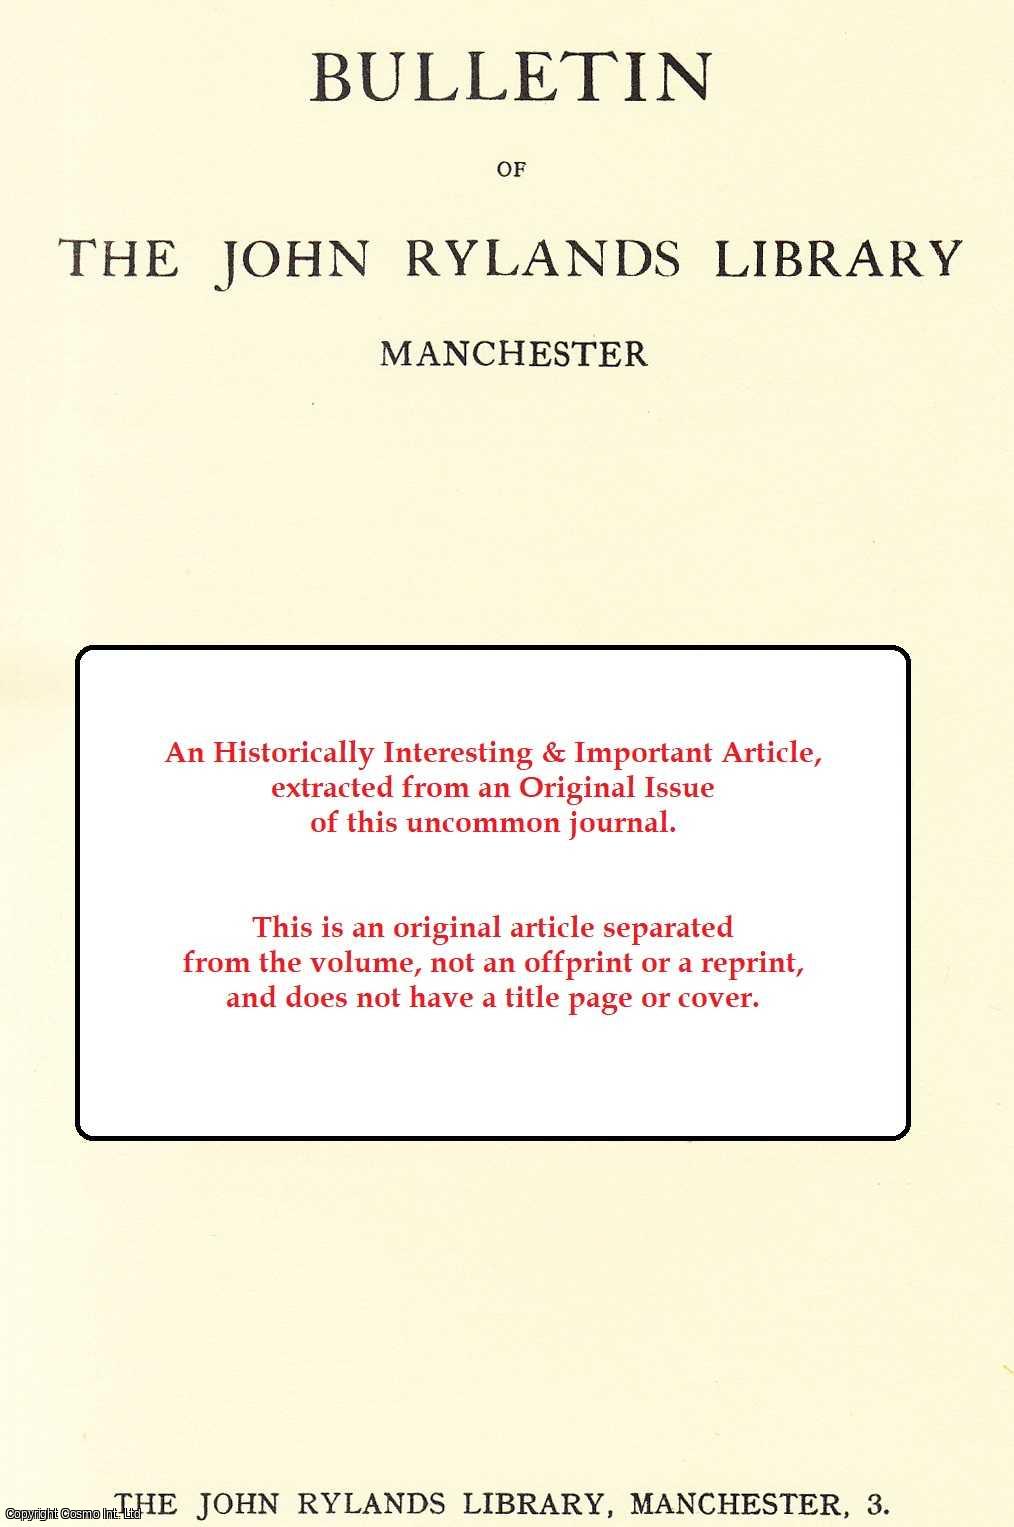 Giuseppe Giangrande - The 'Recensio Lacapeniana' of Eunapius' Vitae Sophistarum. An original article from the Bulletin of the John Rylands Library Manchester, 1954.